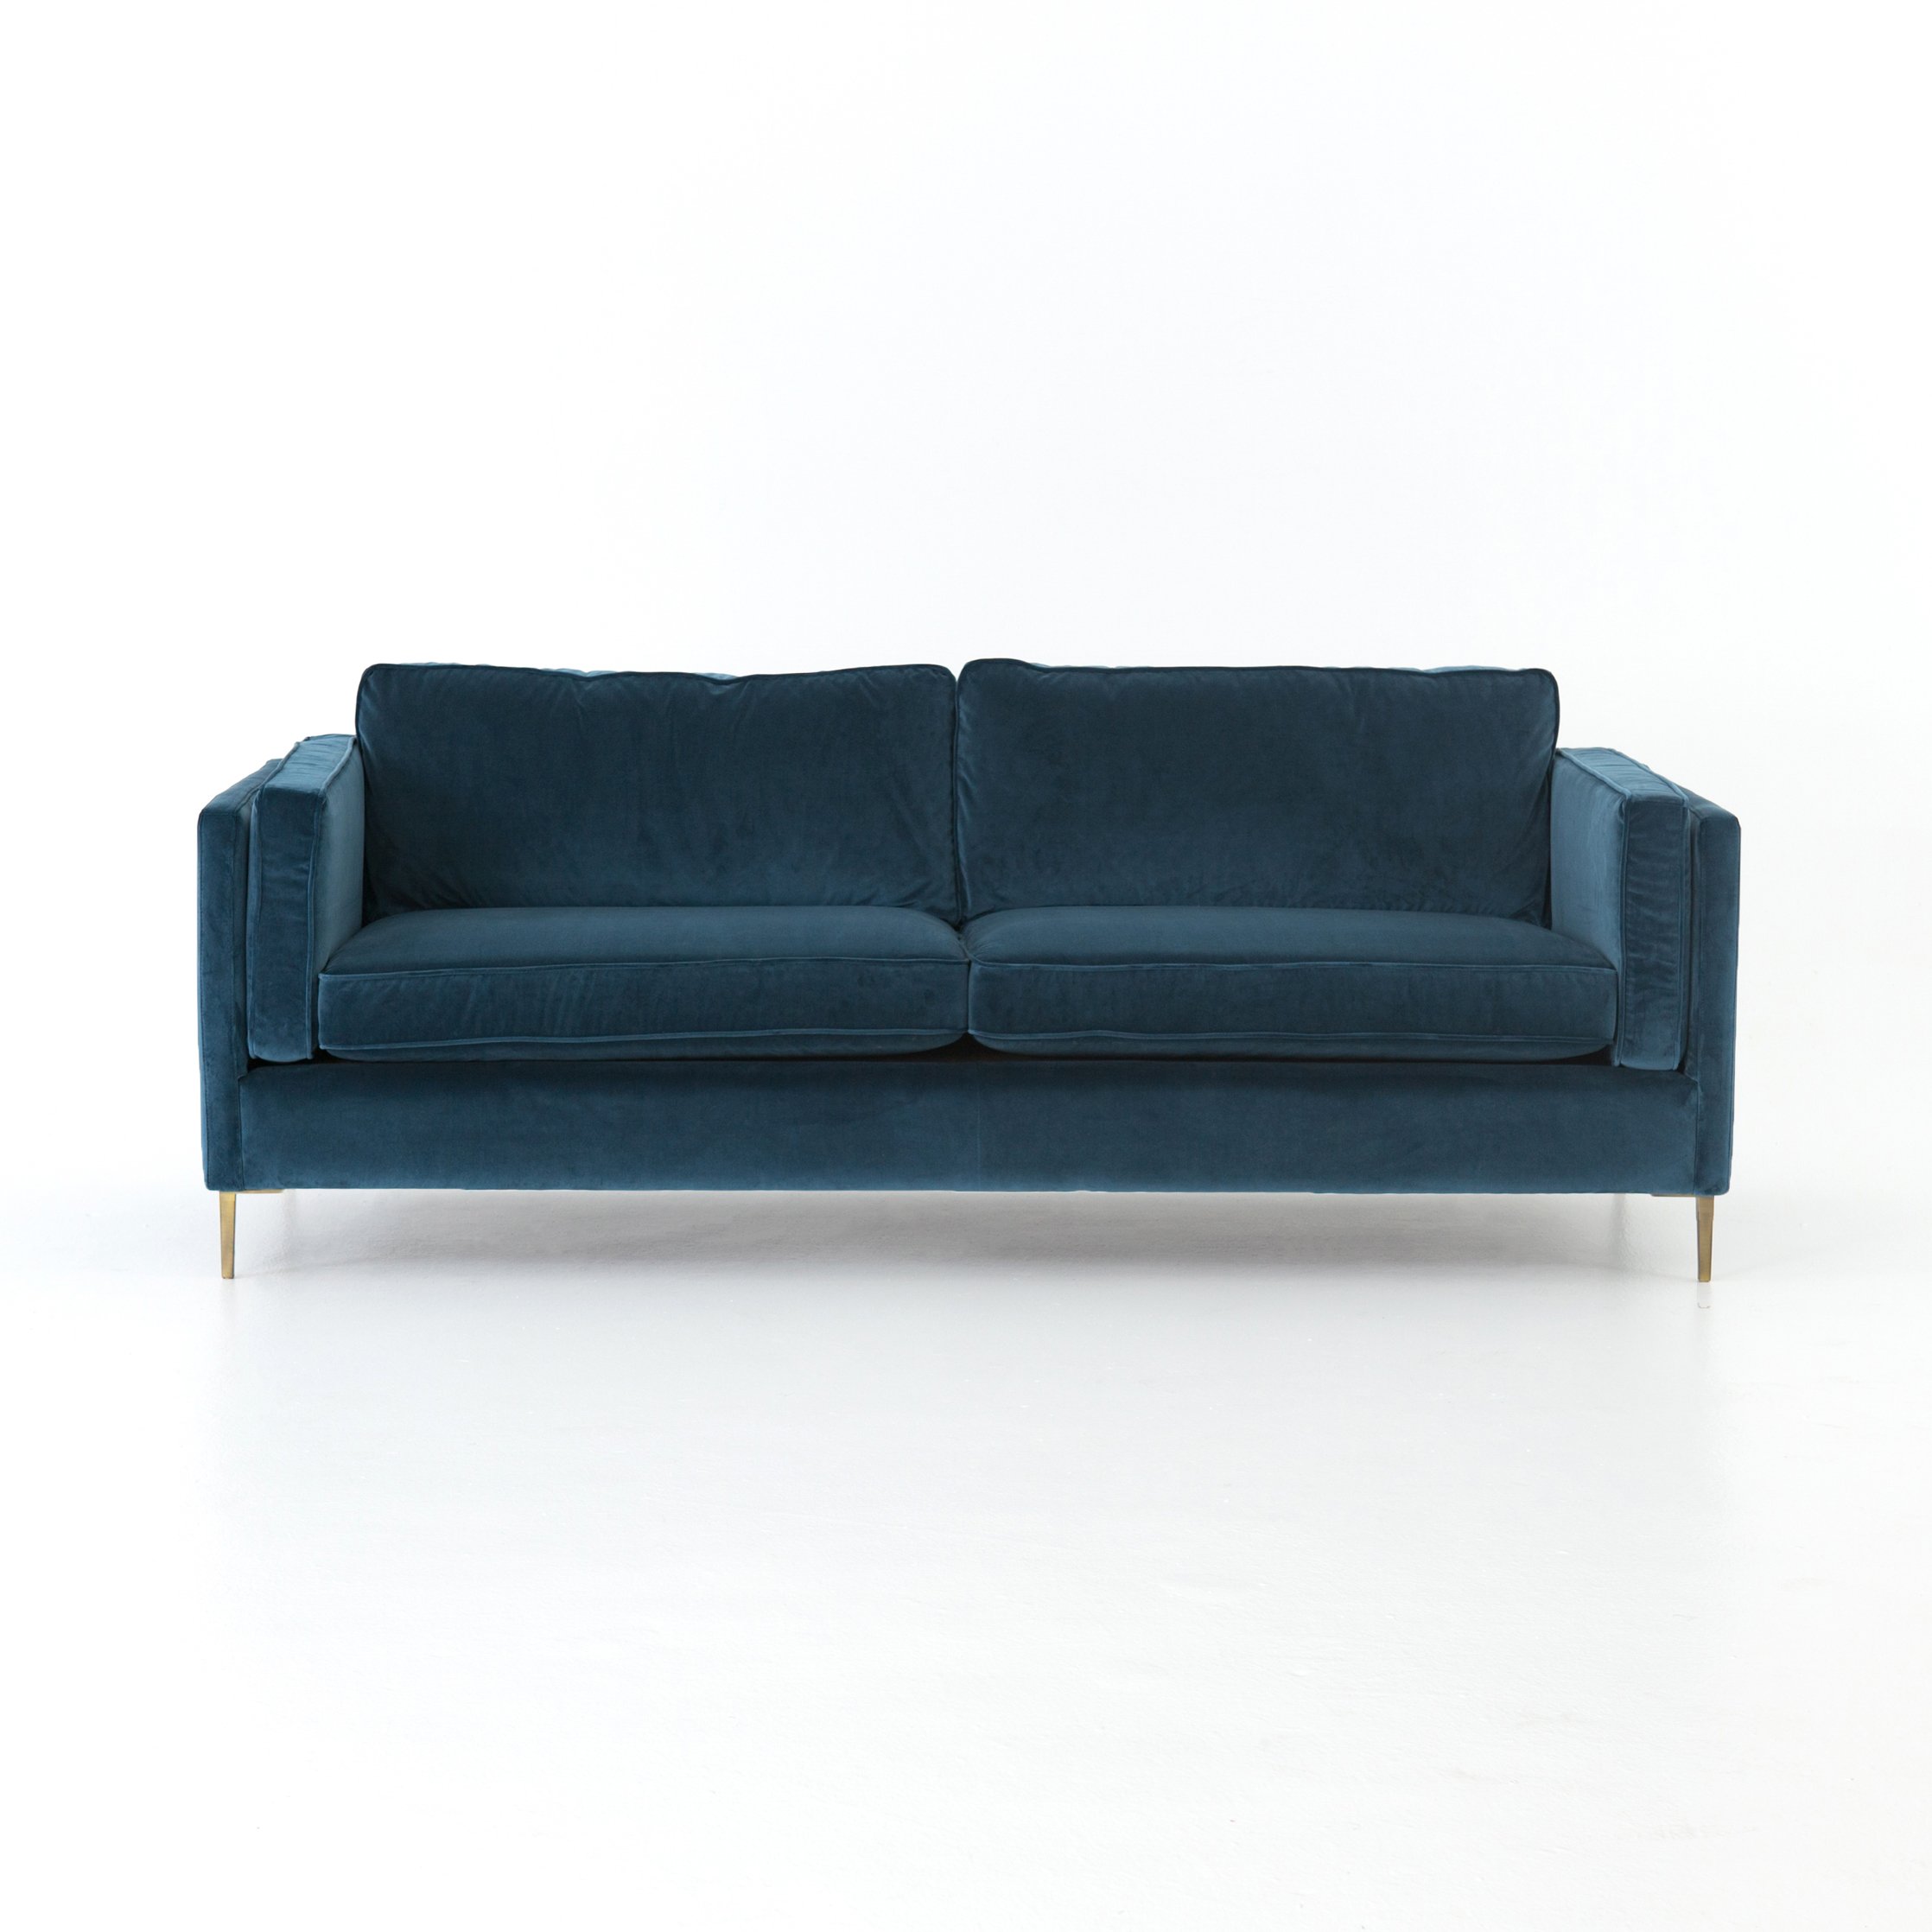 modern blue suede velvet sofa with metal legs Items range from $1899.00 to $2999.00